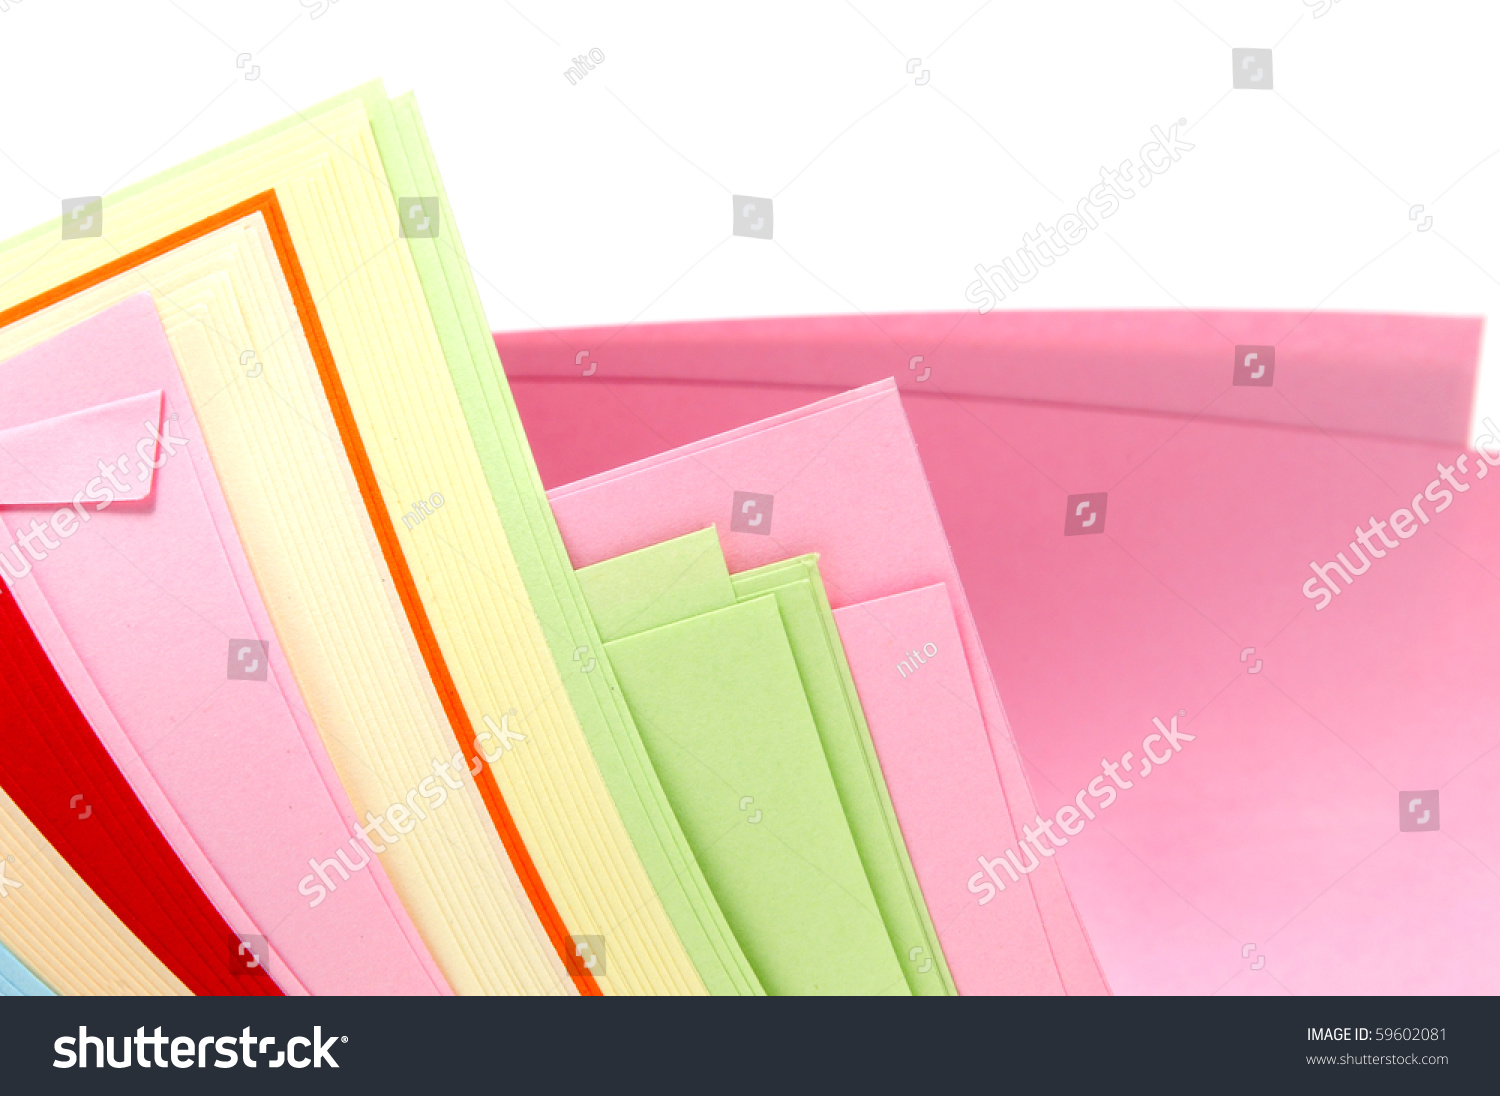 paper-sheets-different-colors-on-white-stock-photo-59602081-shutterstock